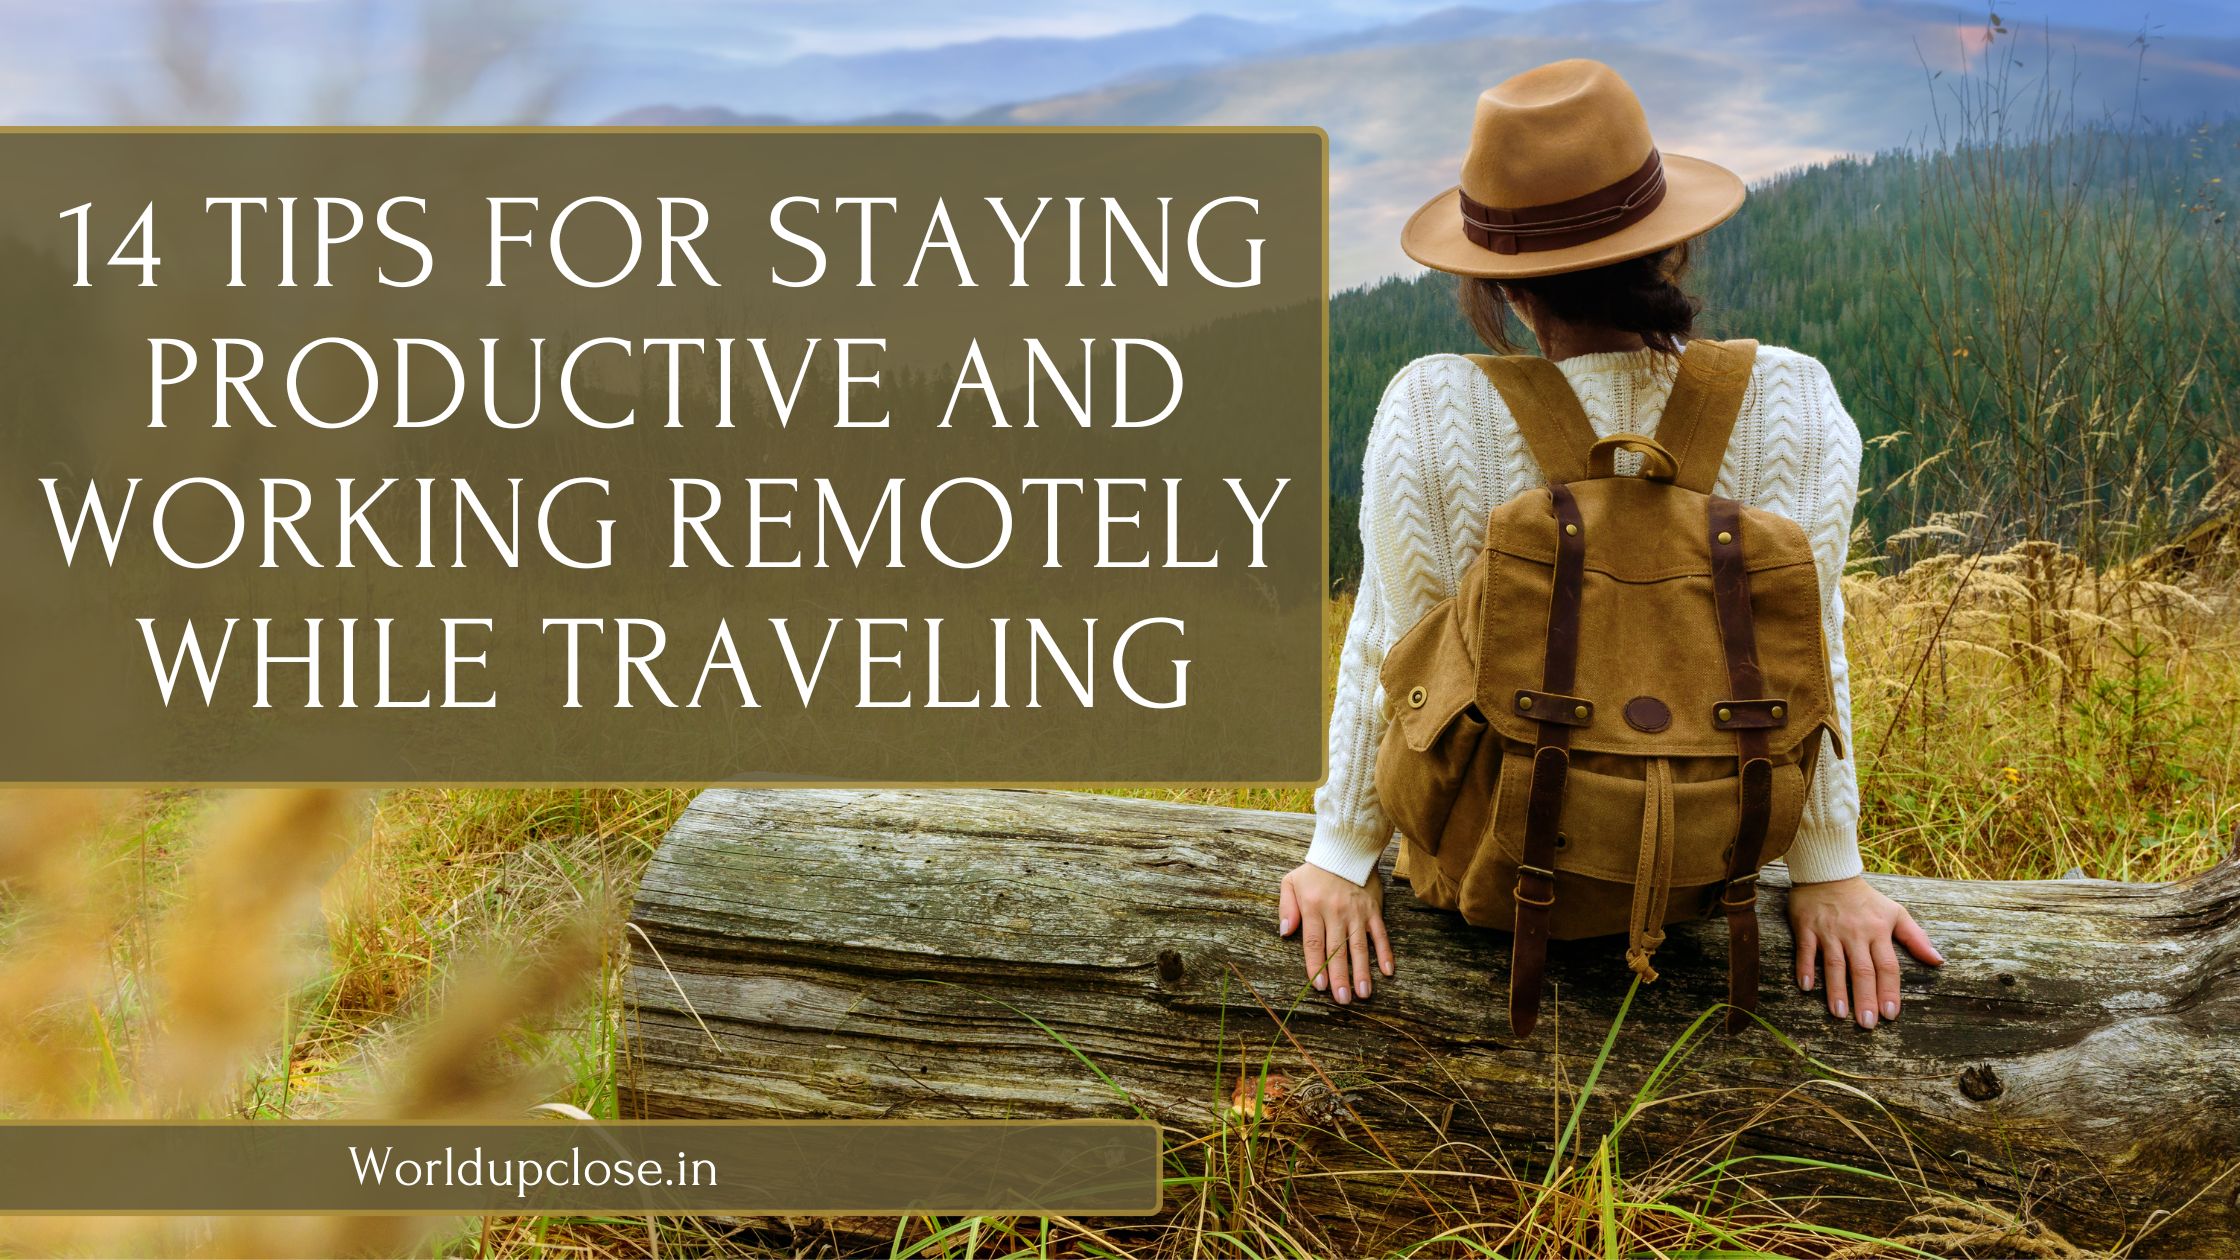 14 Tips for staying productive and working remotely while traveling 25